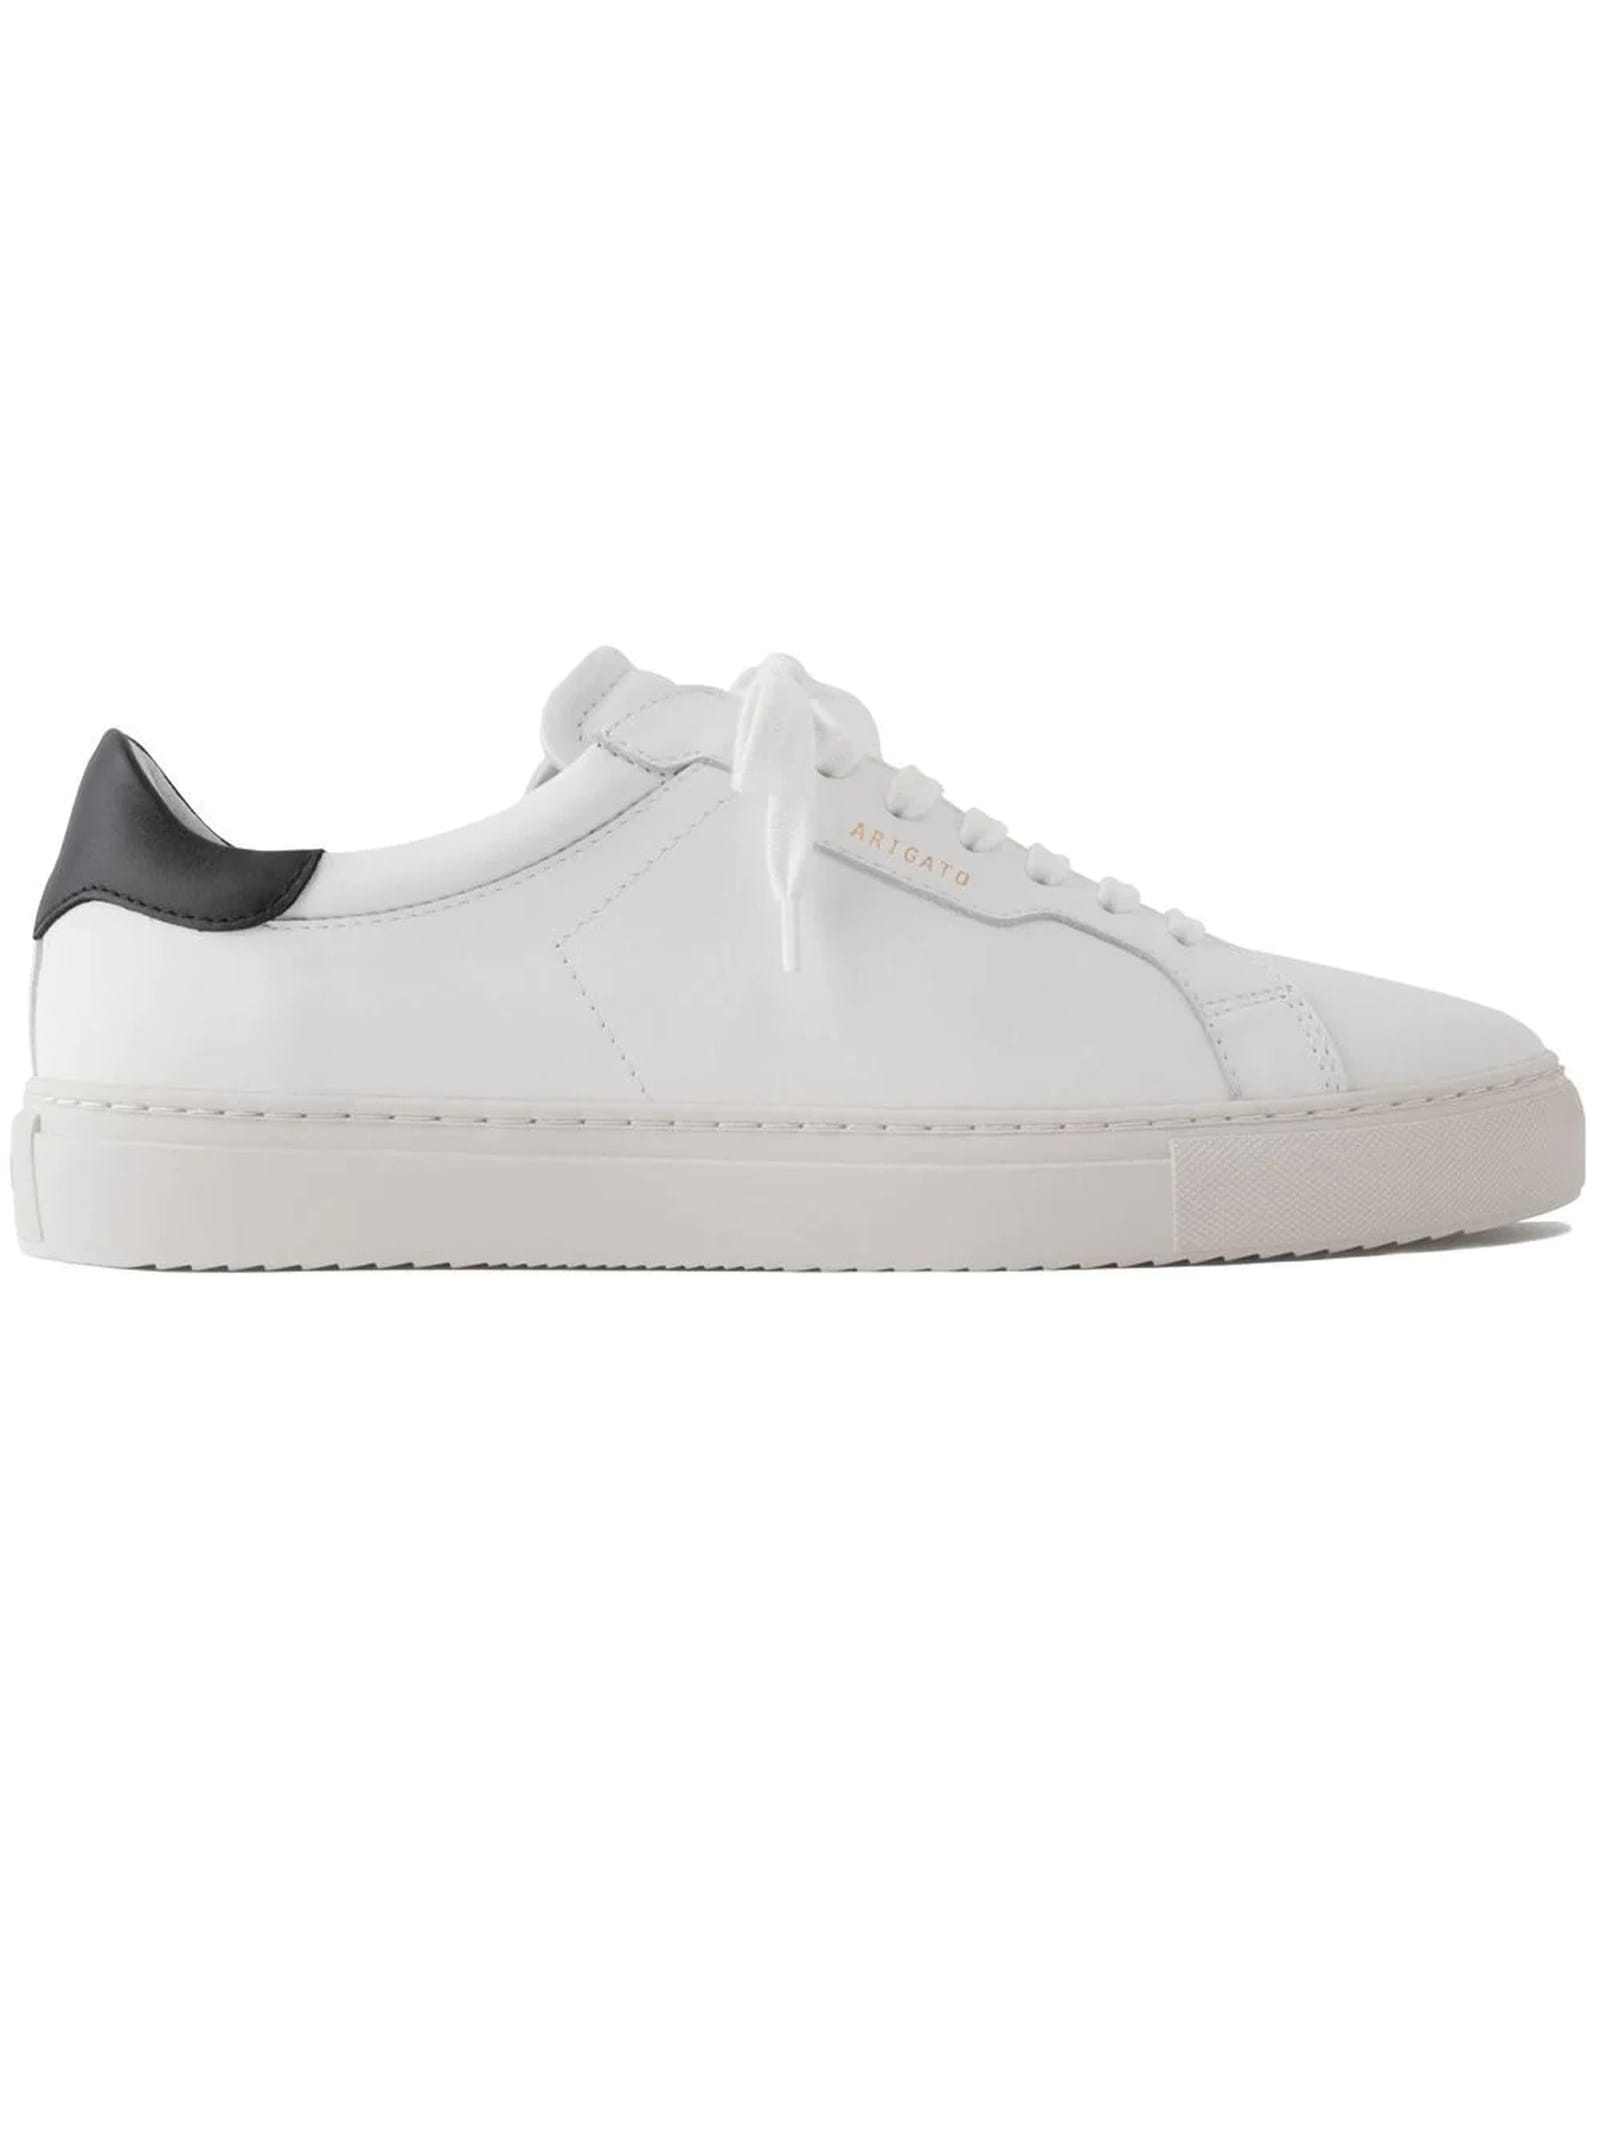 AXEL ARIGATO WHITE CLEAN 180 LEATHER SNEAKERS